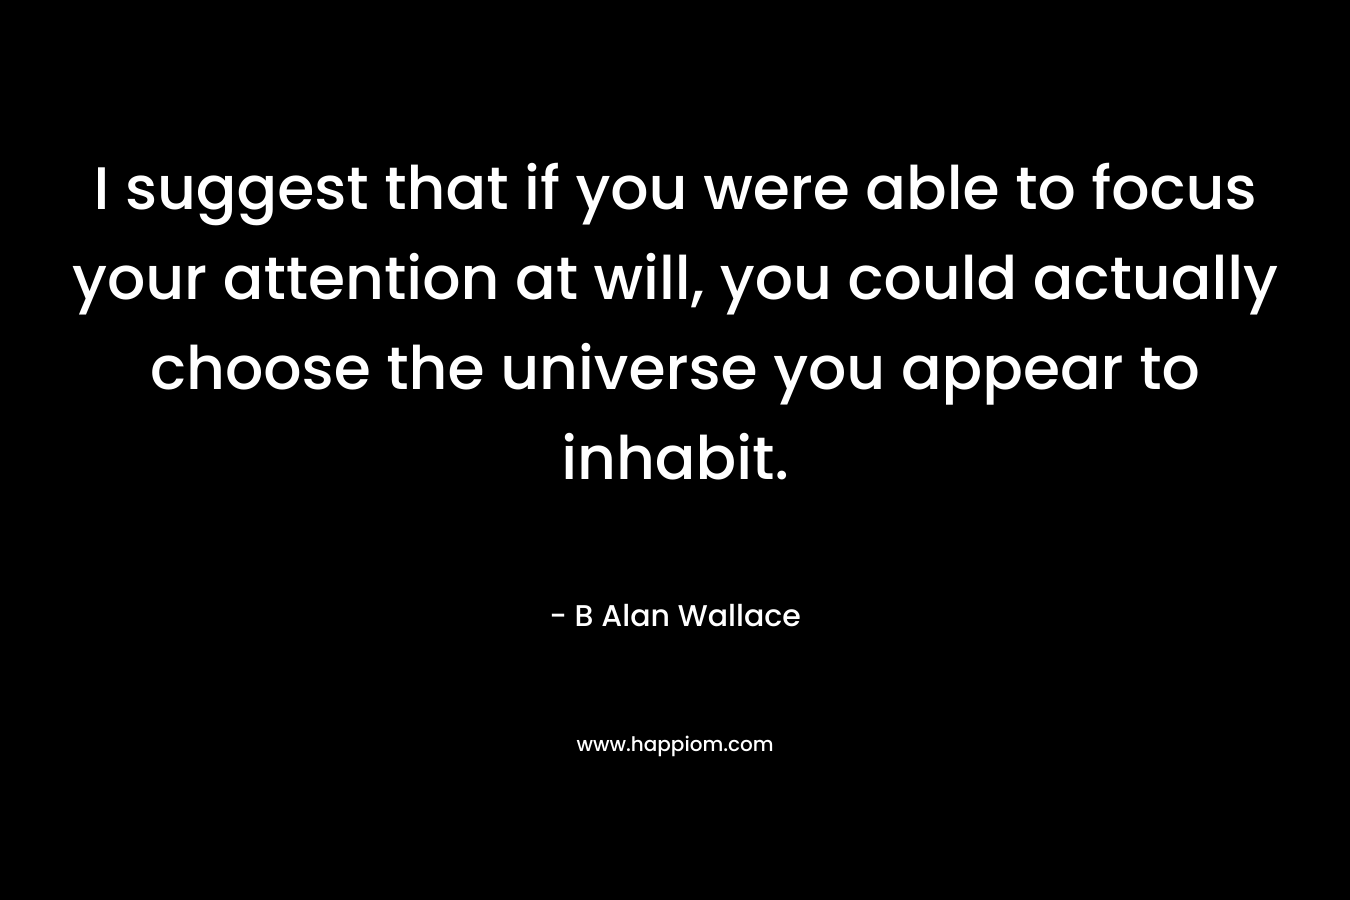 I suggest that if you were able to focus your attention at will, you could actually choose the universe you appear to inhabit.